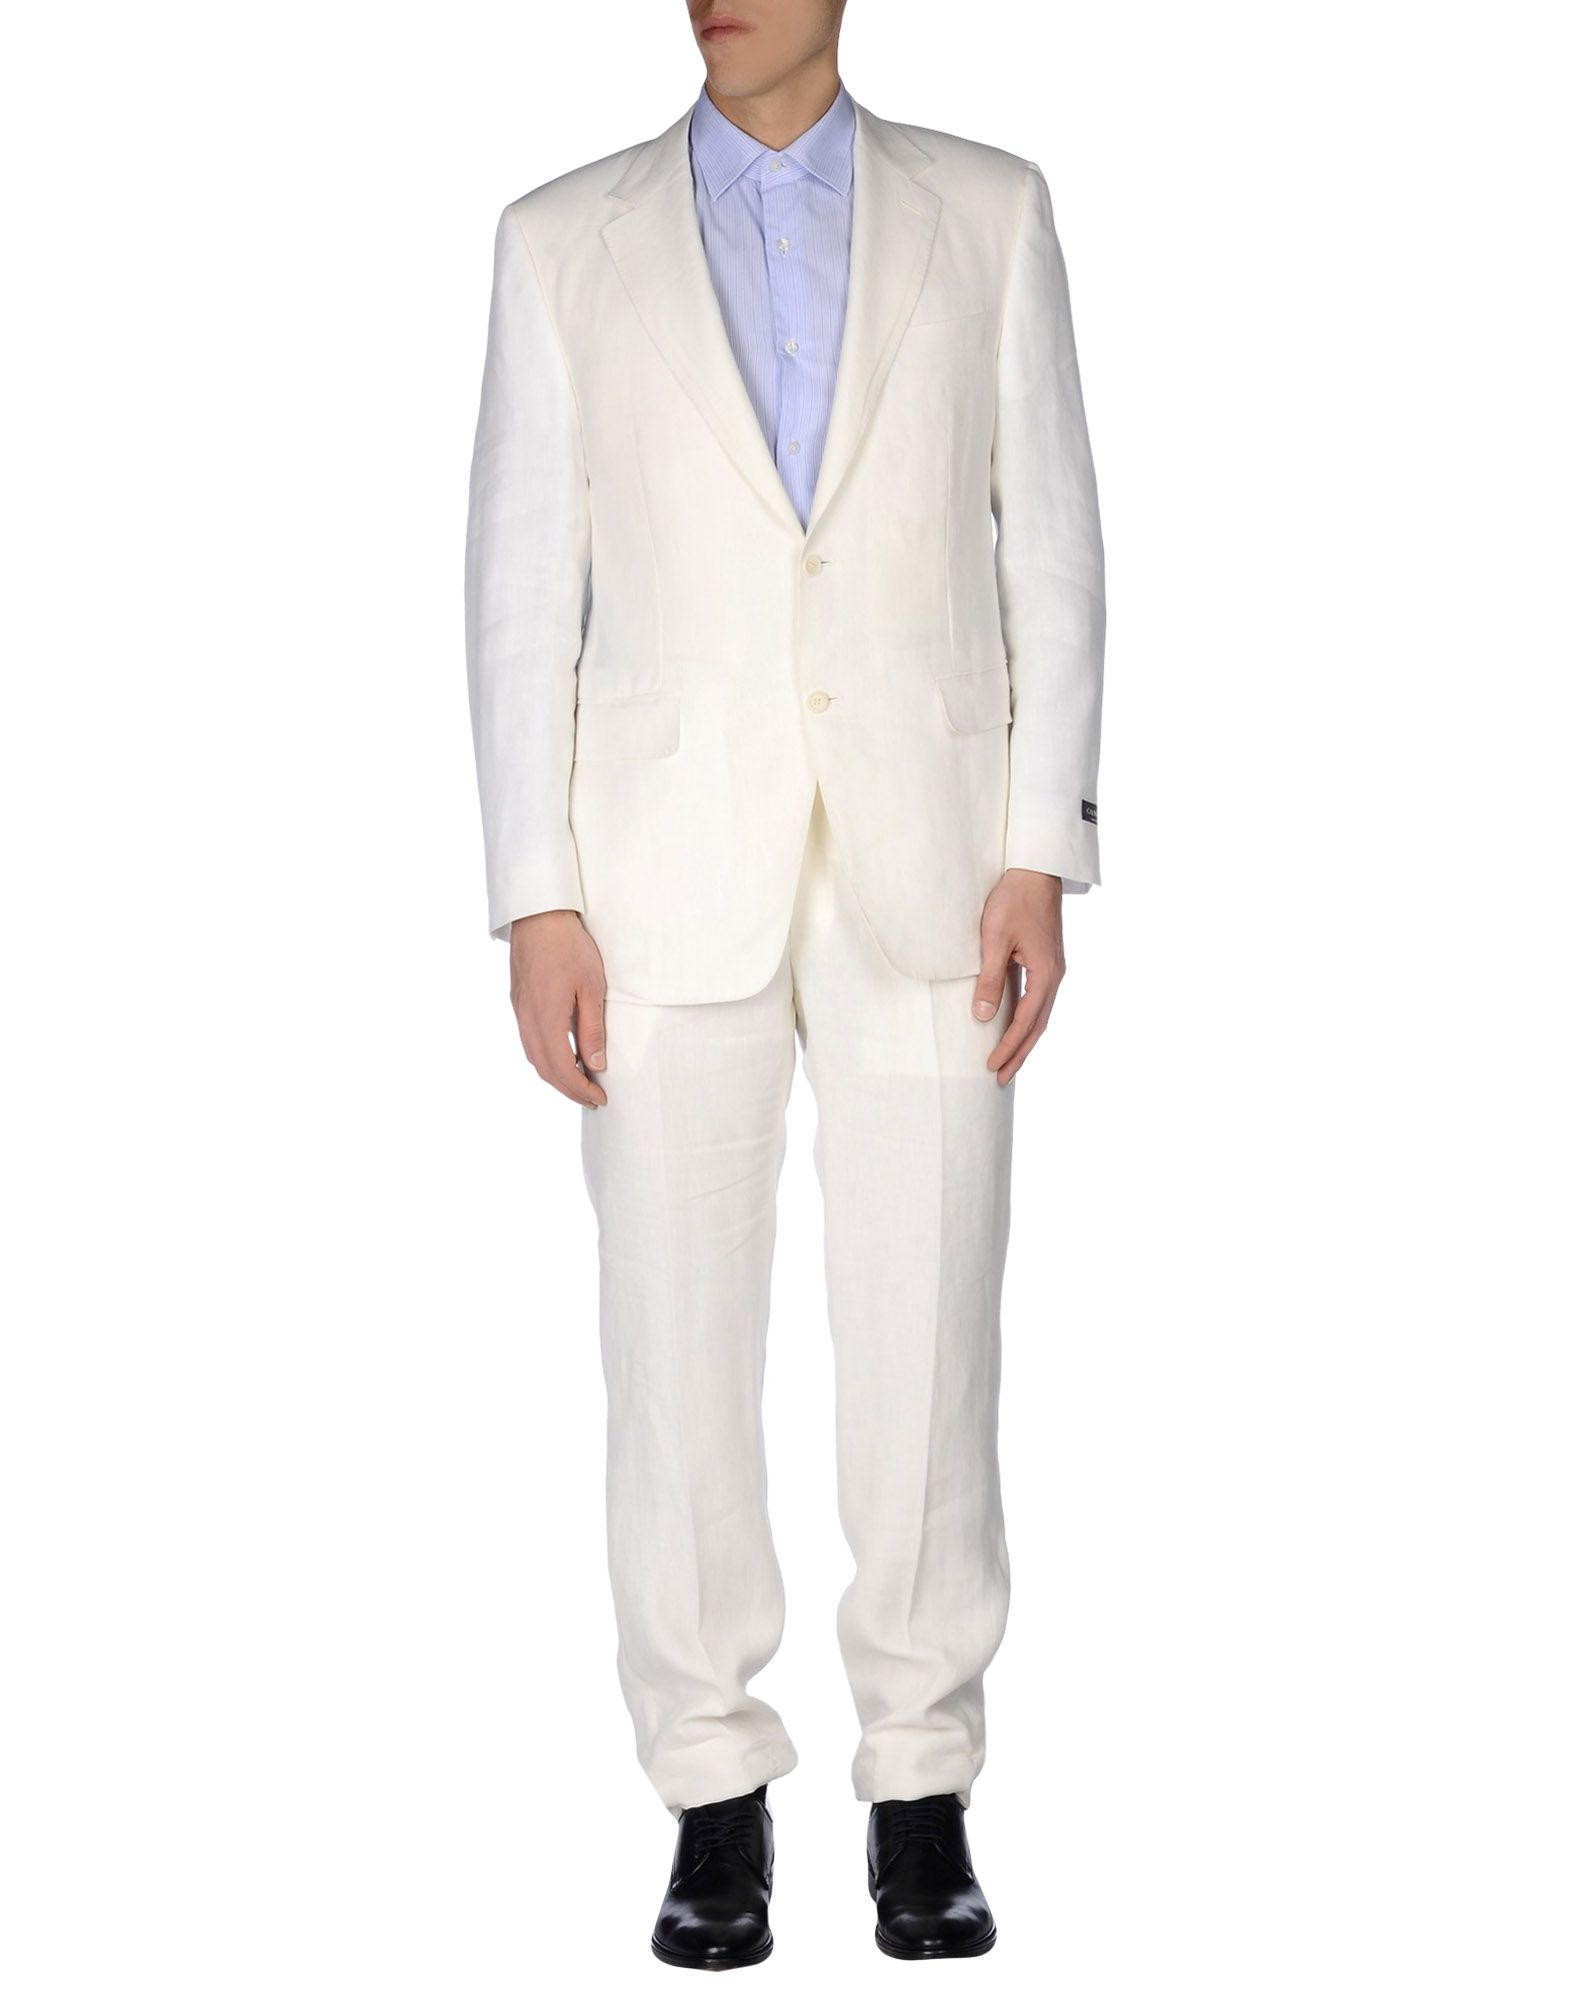 Lyst - Canali Suit in White for Men